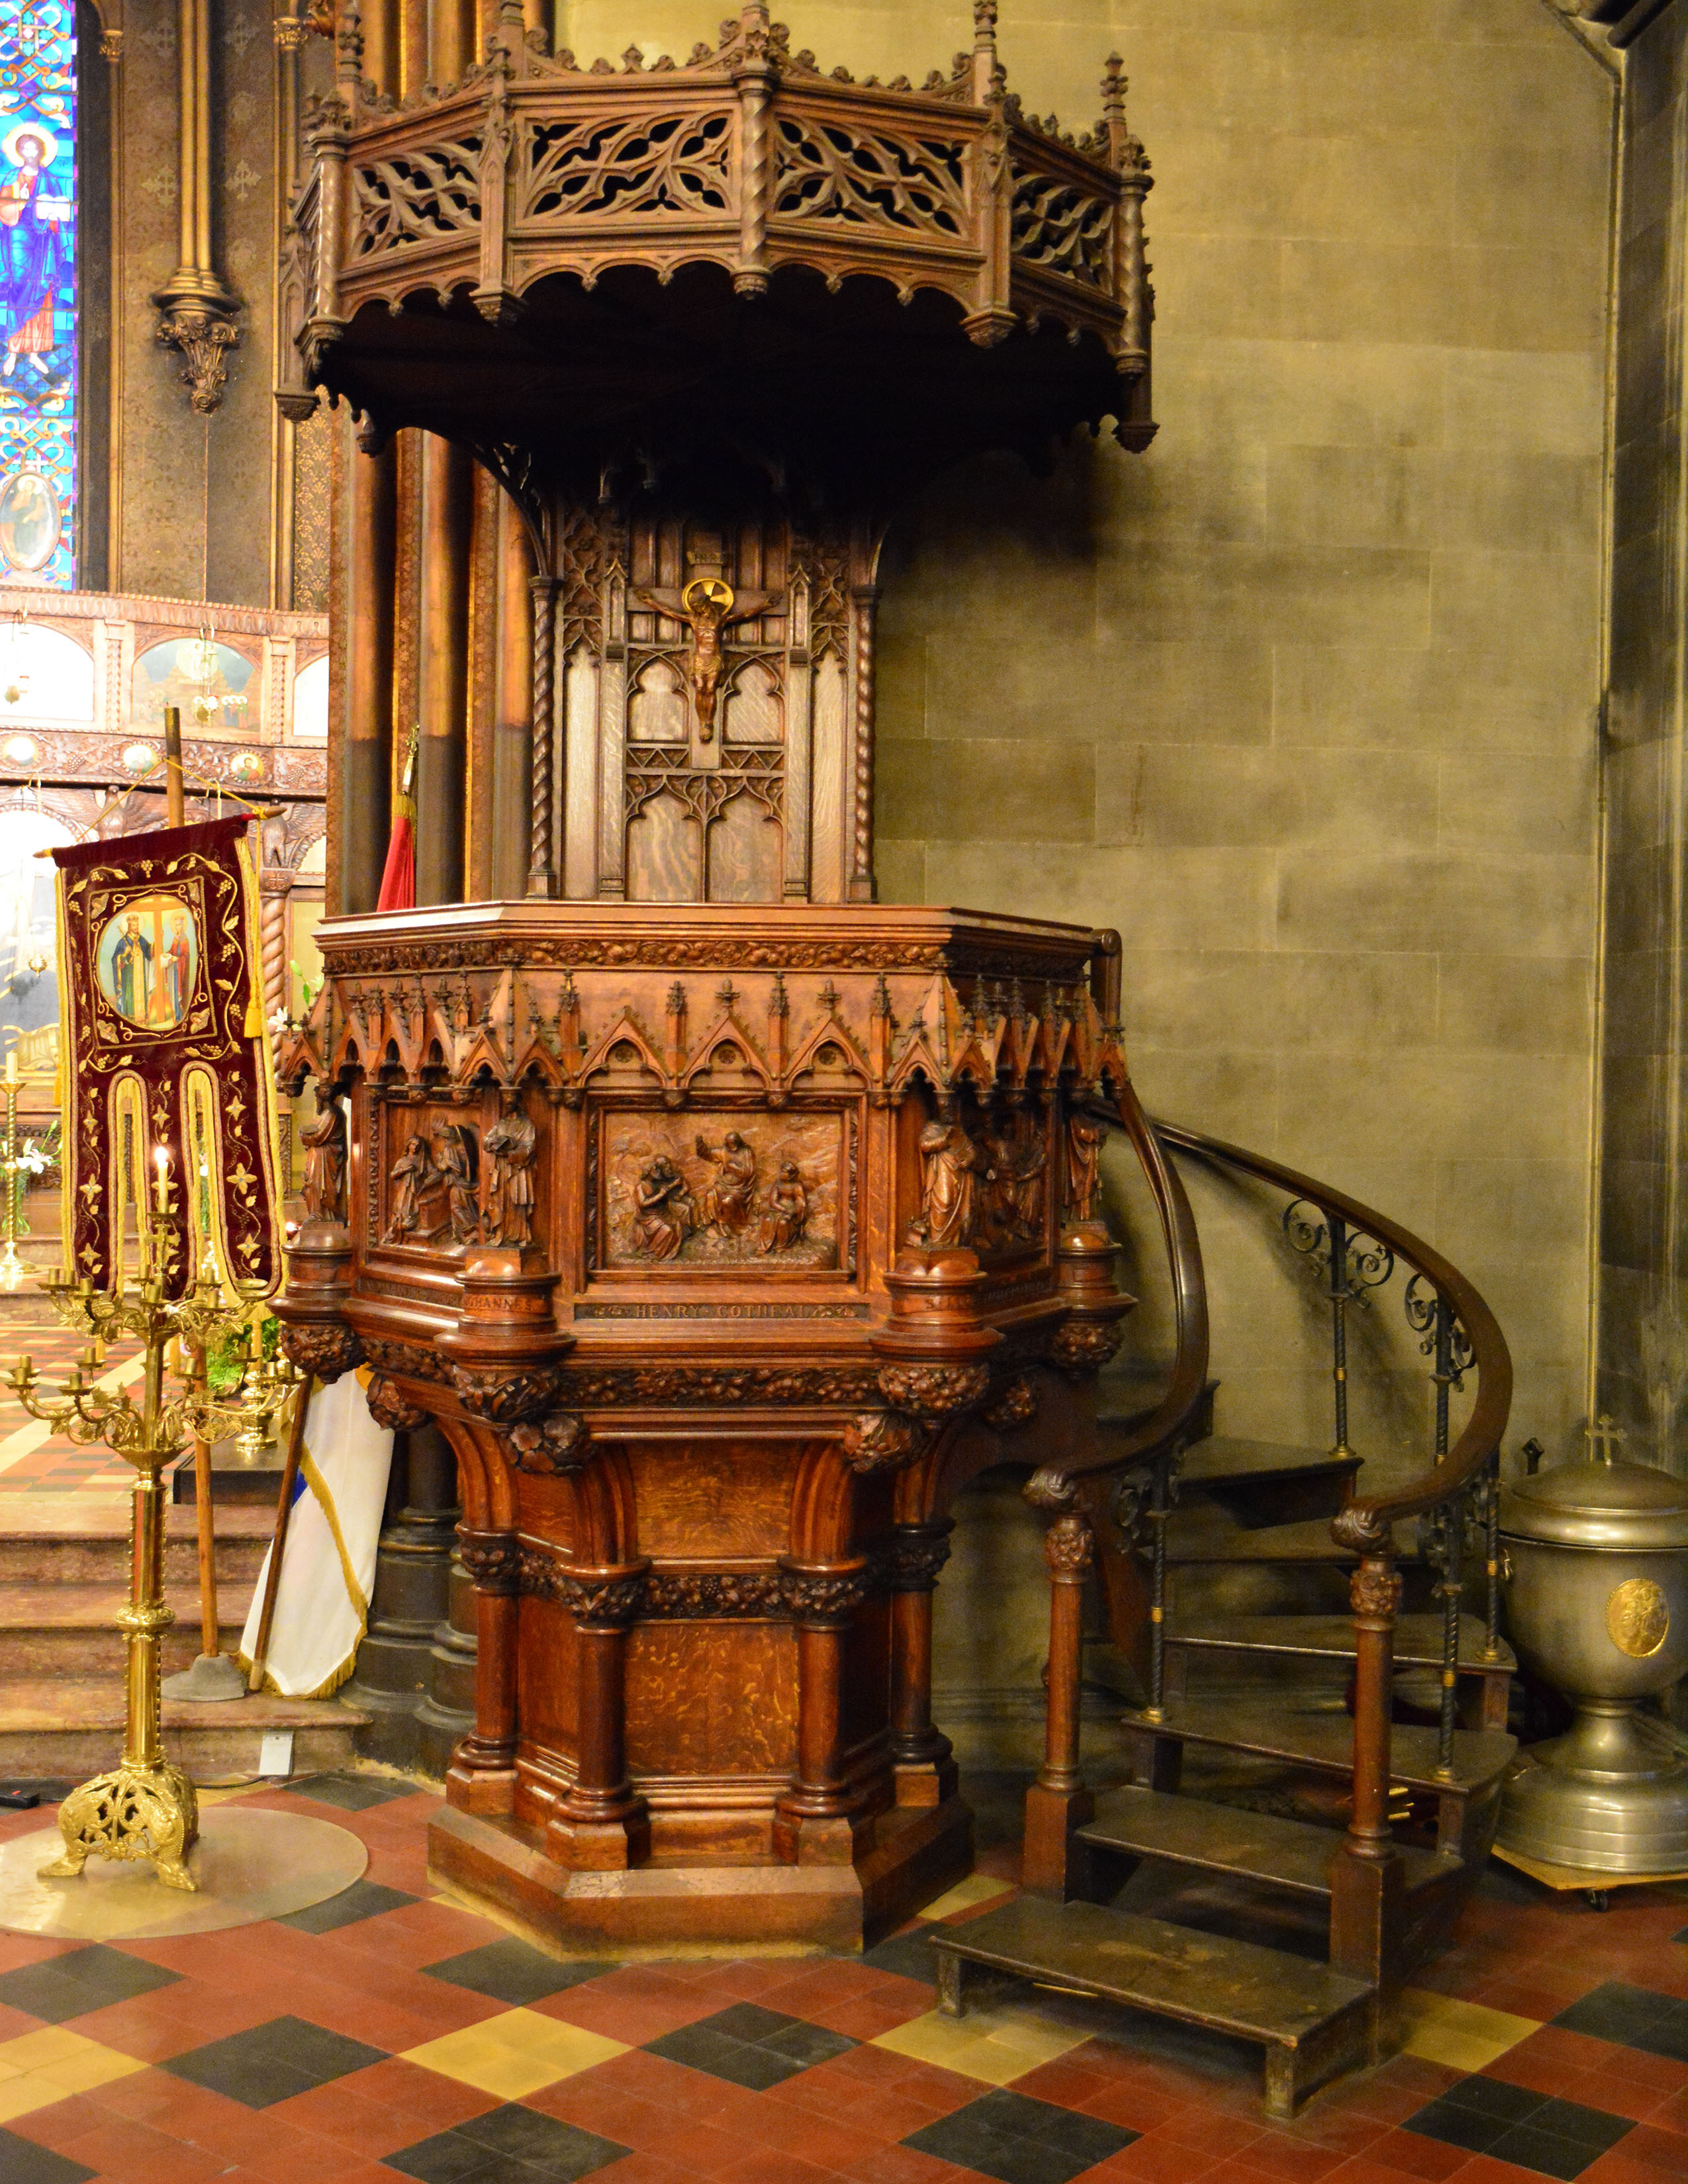 Intricately carved wooden pulpit